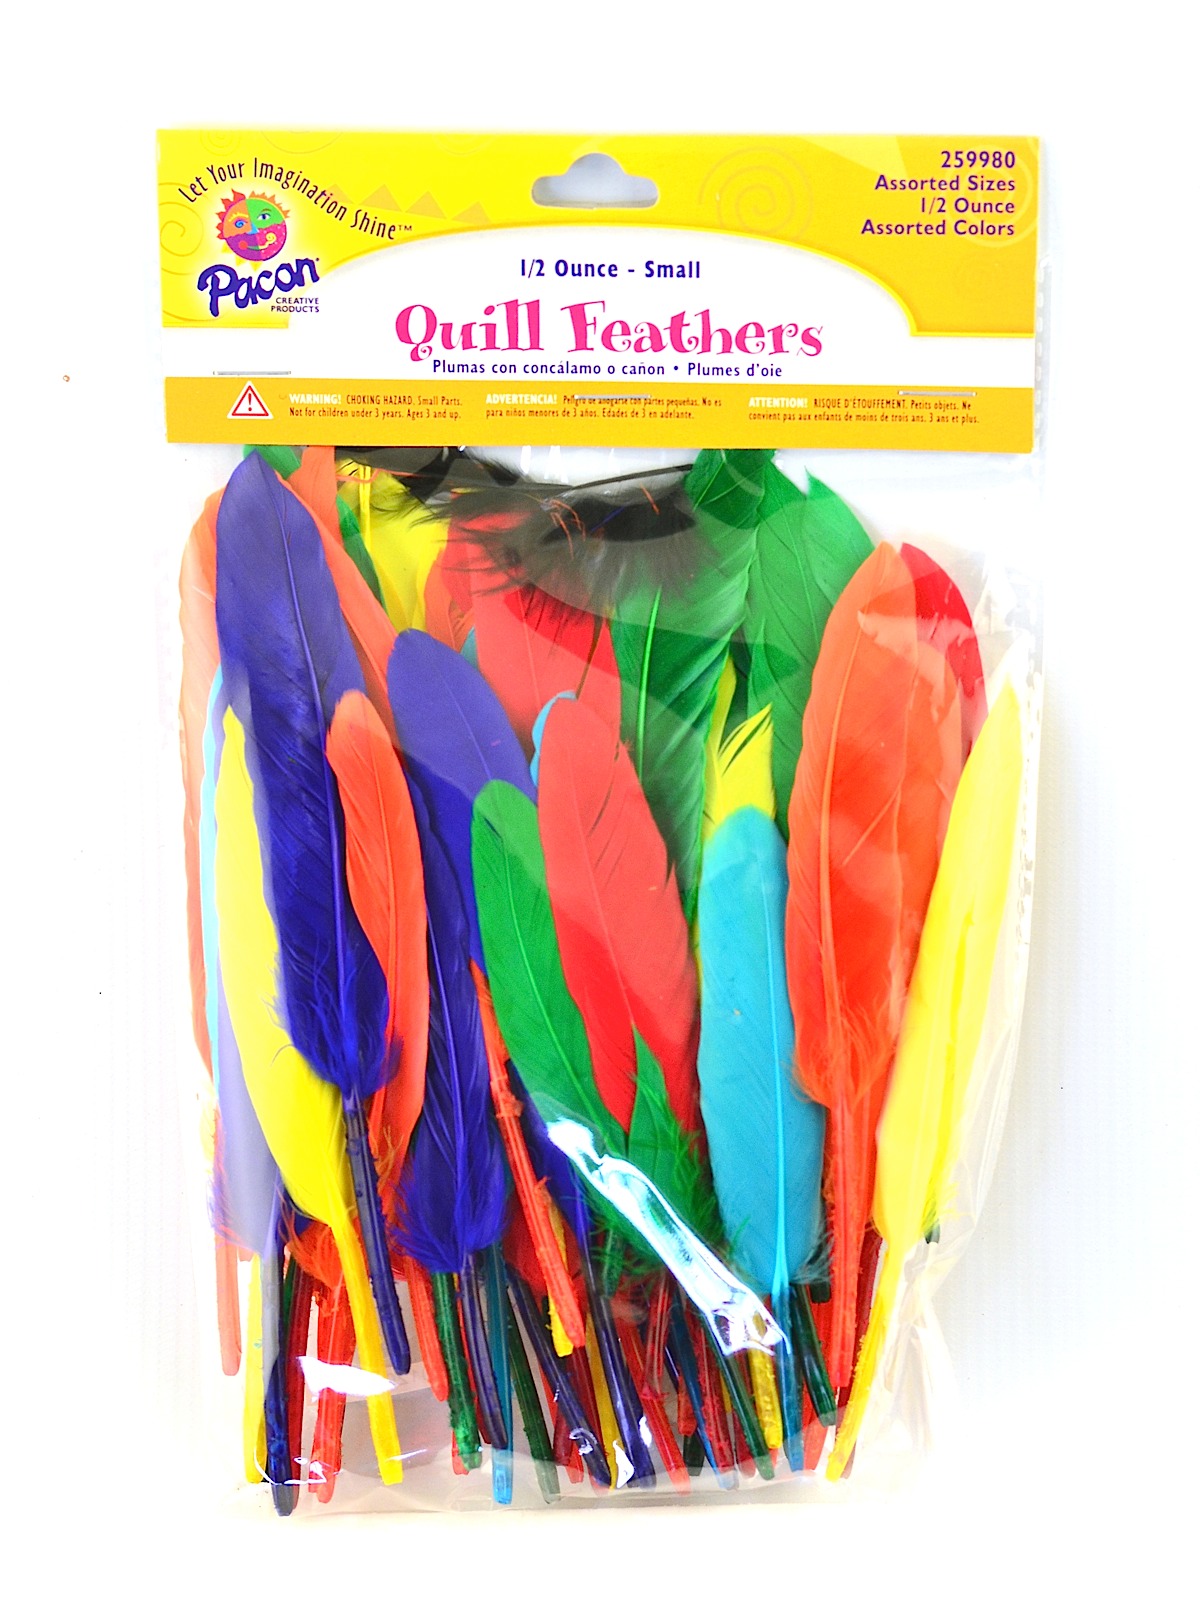 Colored Craft Feathers Small Quill Feathers Assorted Bright Colors 1 2 Oz. Bag